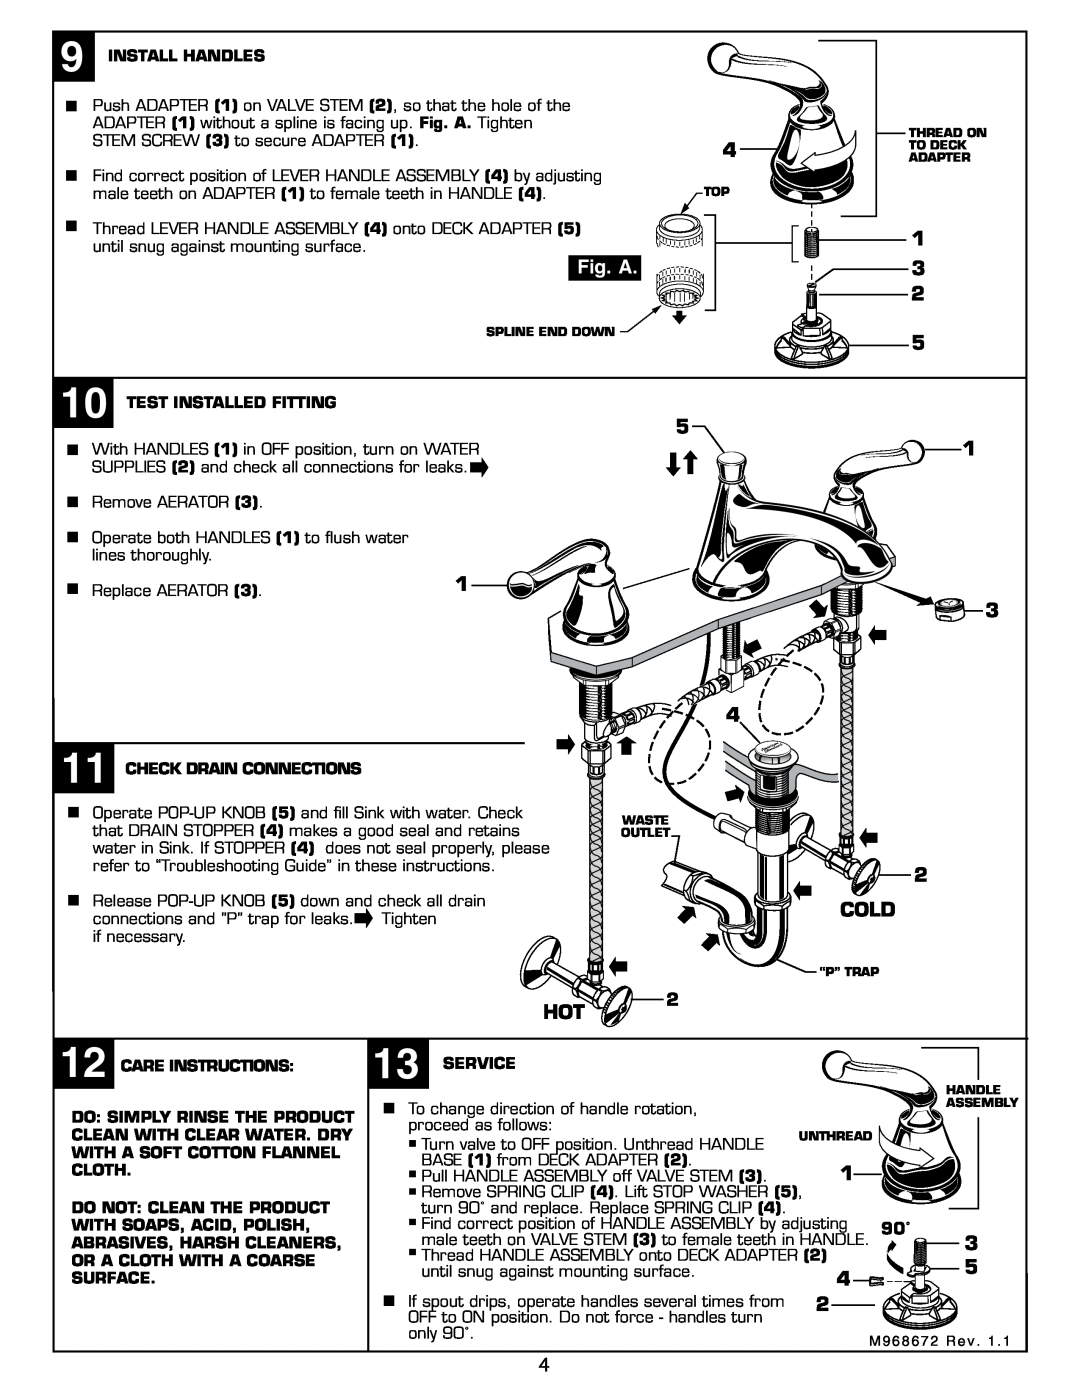 American Standard 4508S installation instructions Fig. A, Cold 